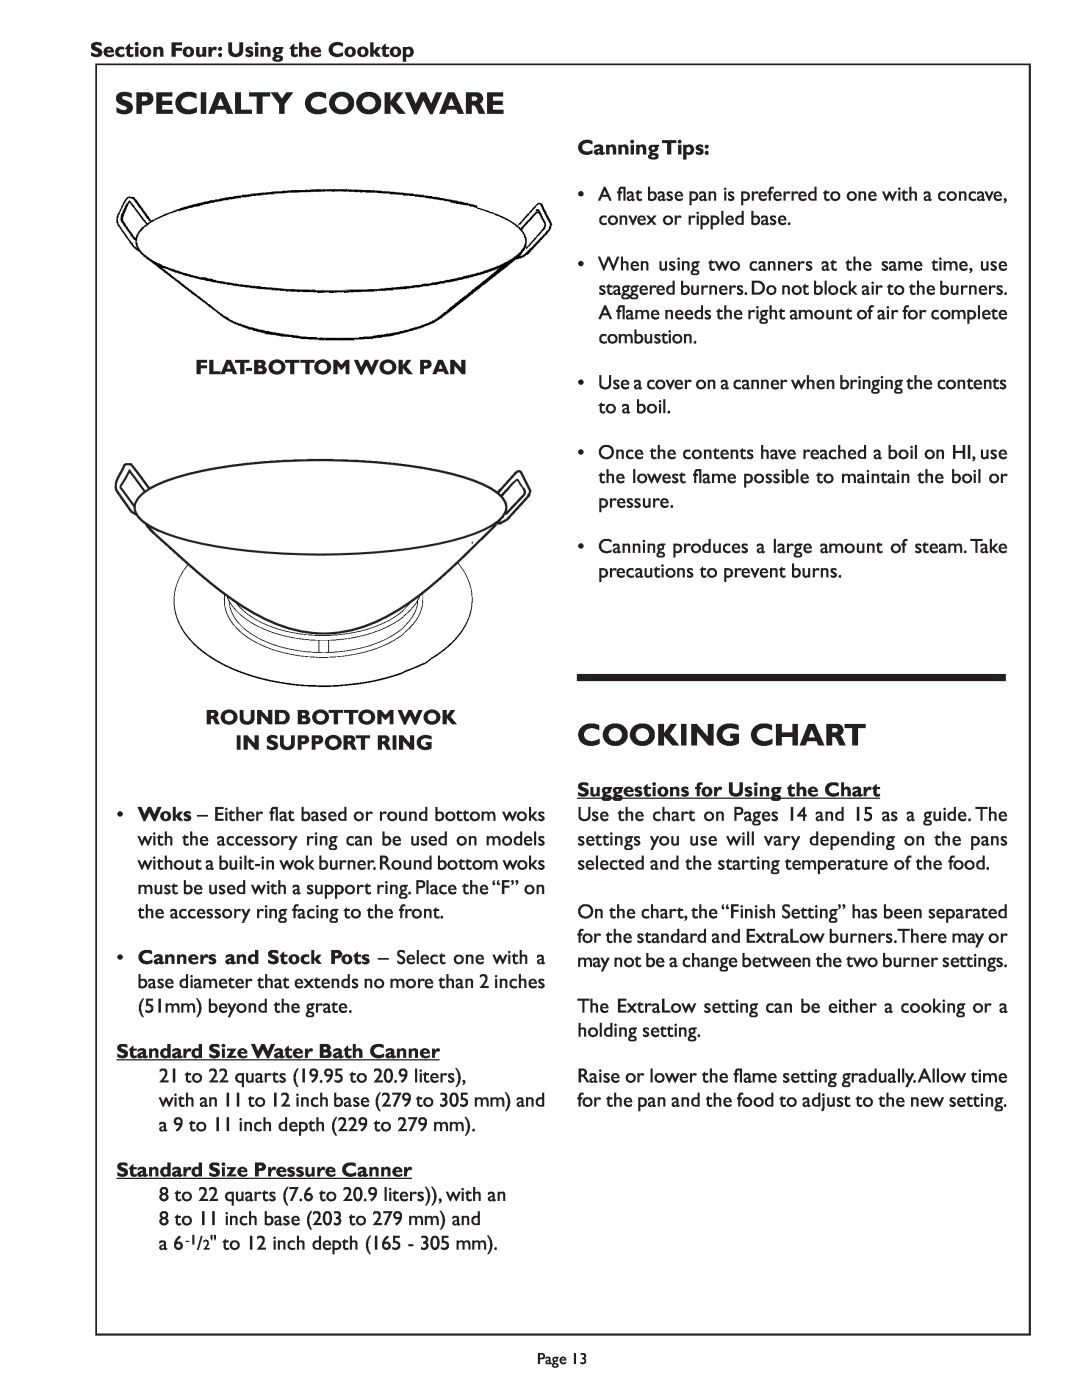 Range Kleen PSC486GL Specialty Cookware, Cooking Chart, Section Four Using the Cooktop, Canning Tips, Flat-Bottom Wok Pan 